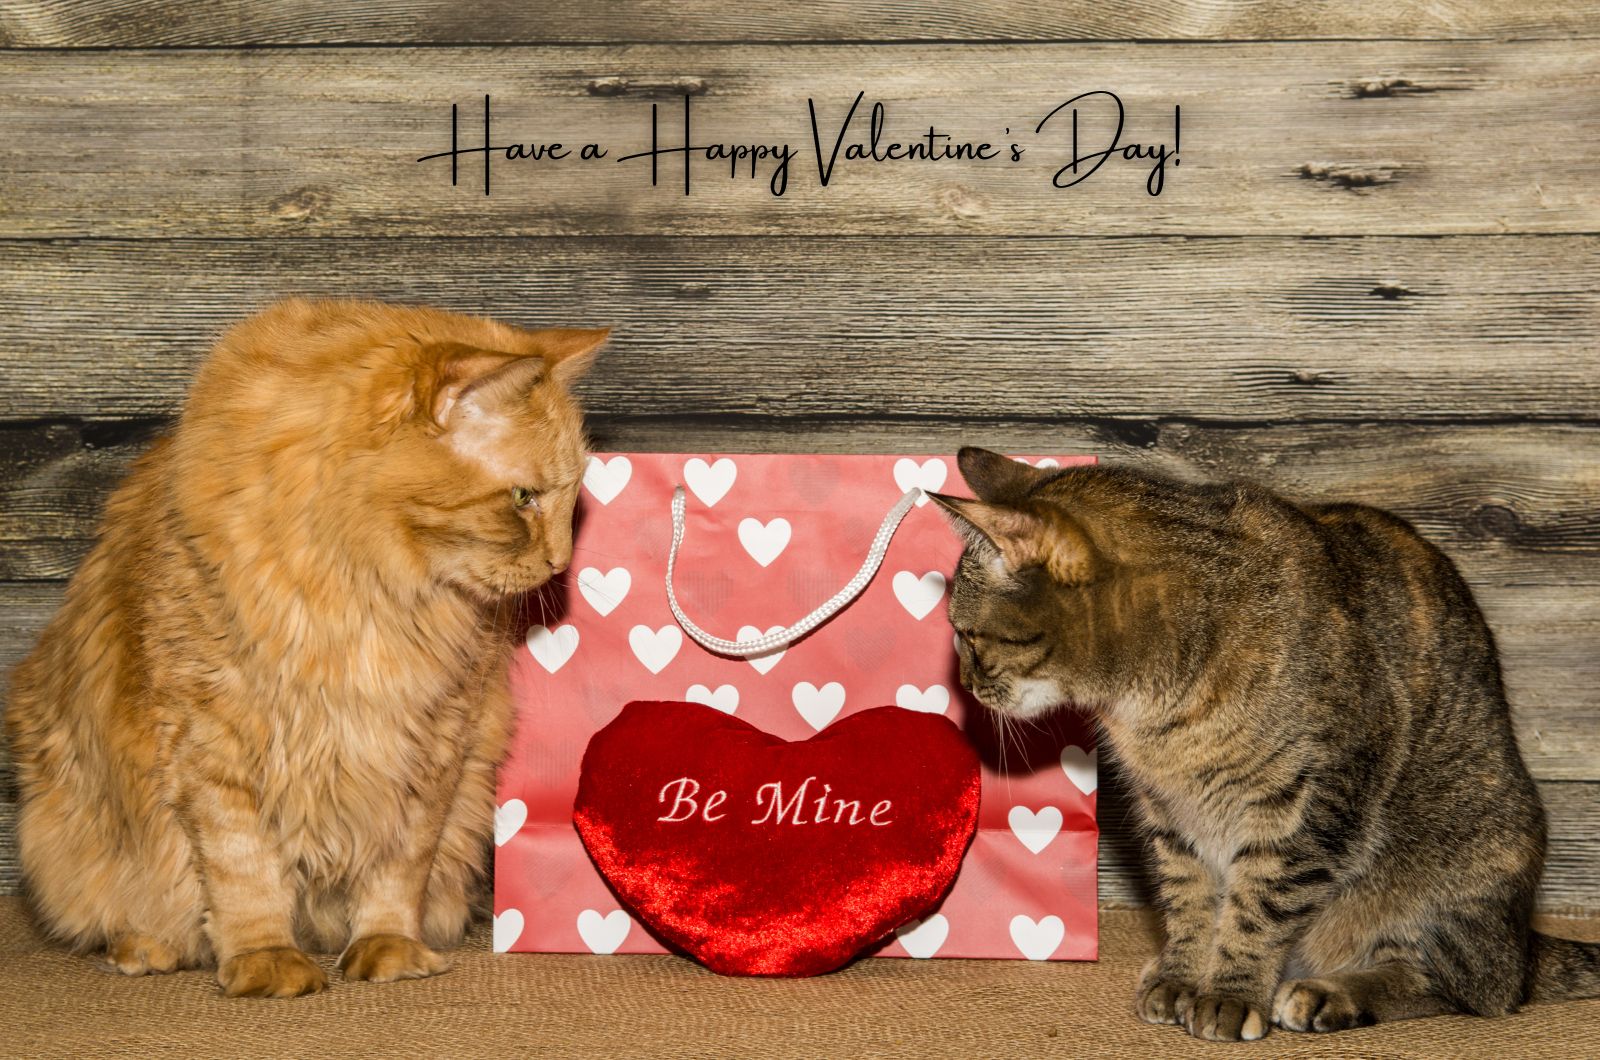 two cats looking at red valentine's heart